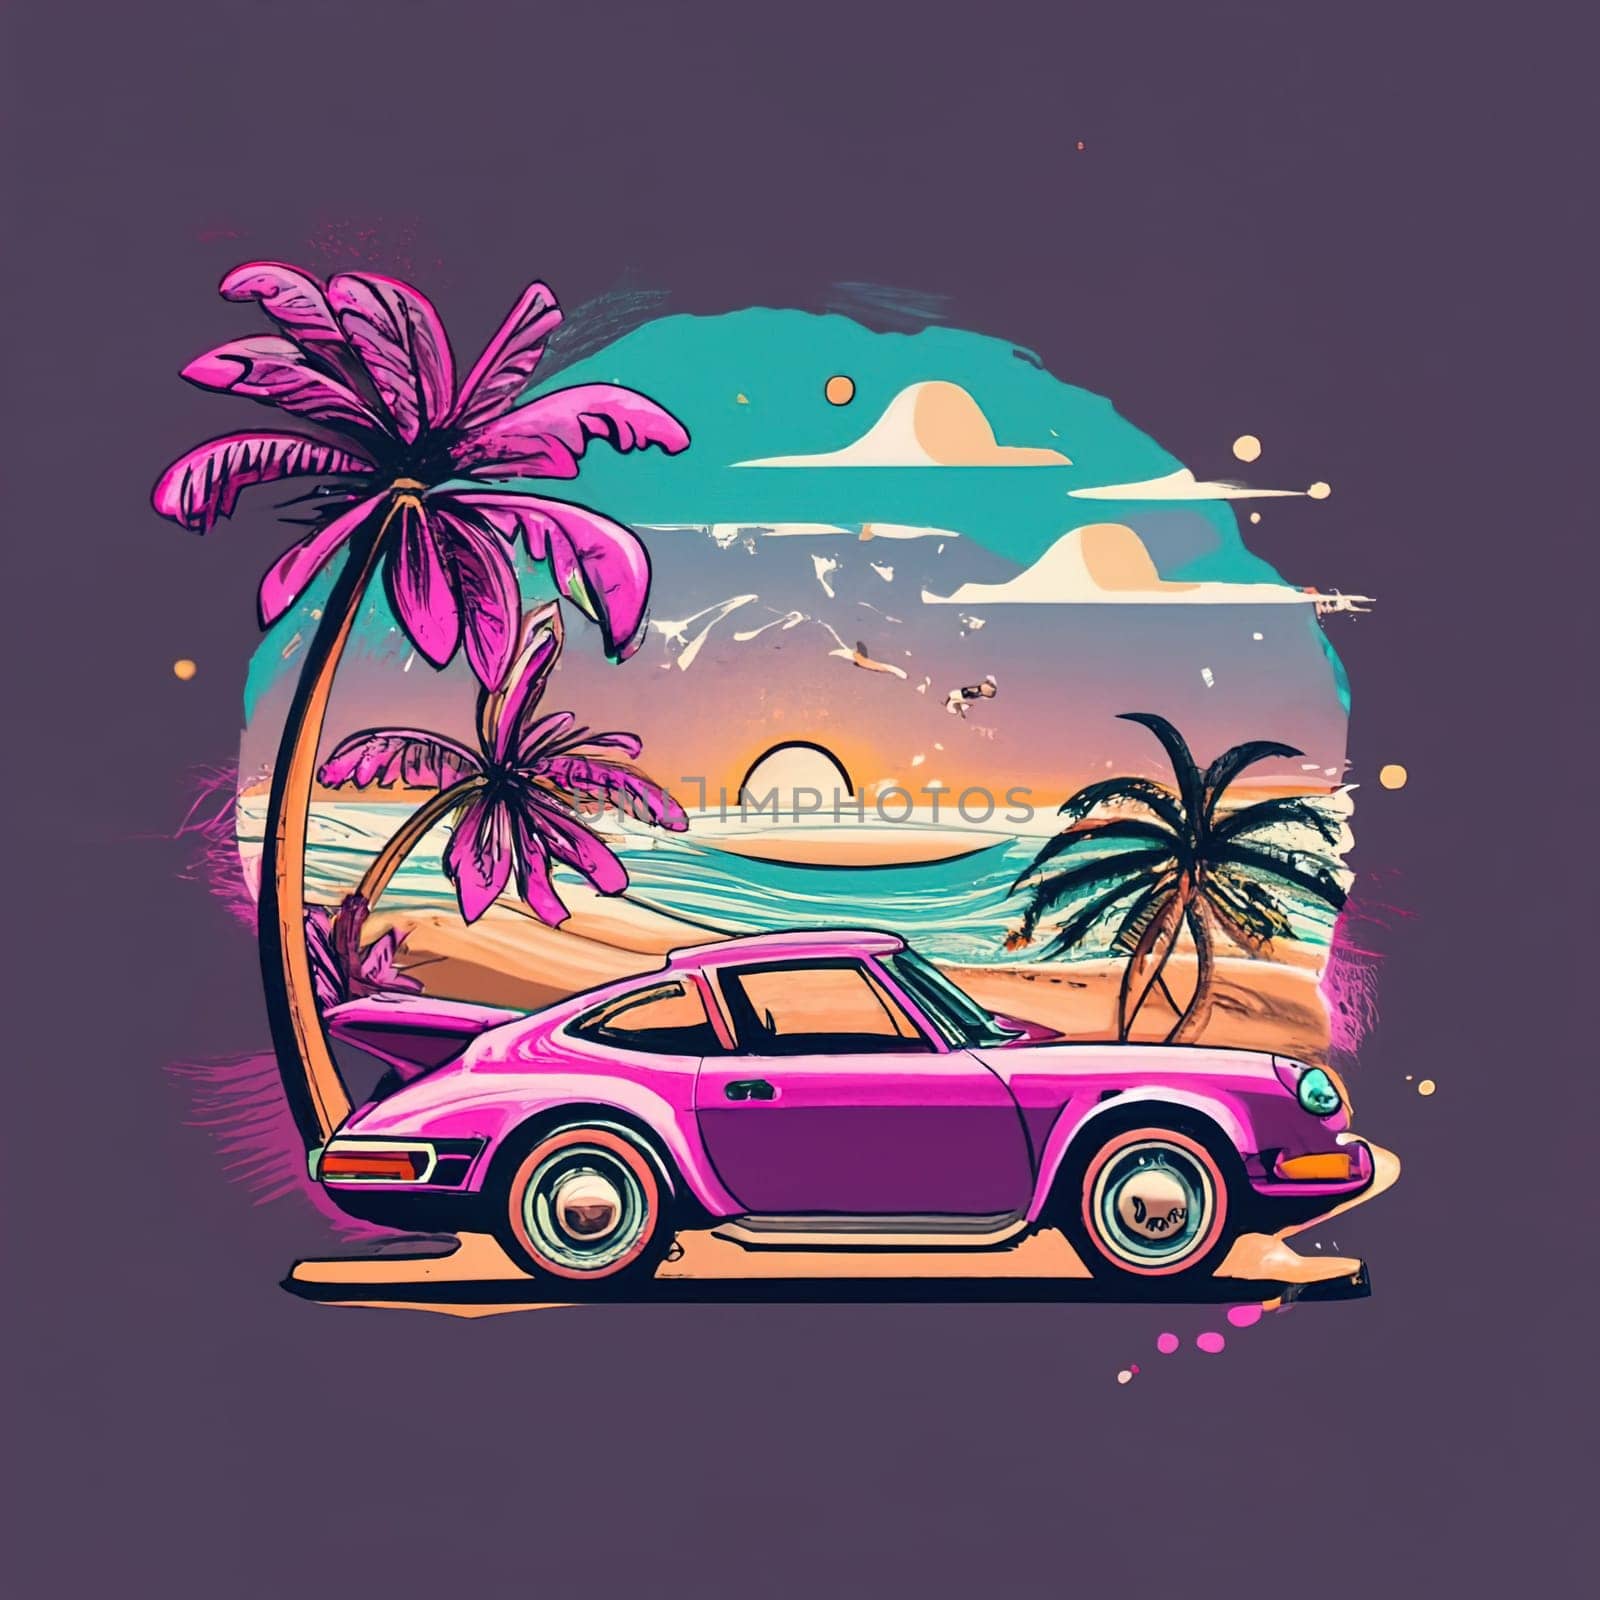 T-shirt design, minimalist ink painting, Purple Porsche 911 sports car, Vanishing Point on the beach, beach chair, iced drink, sunset, colored ink splash, water drop download image